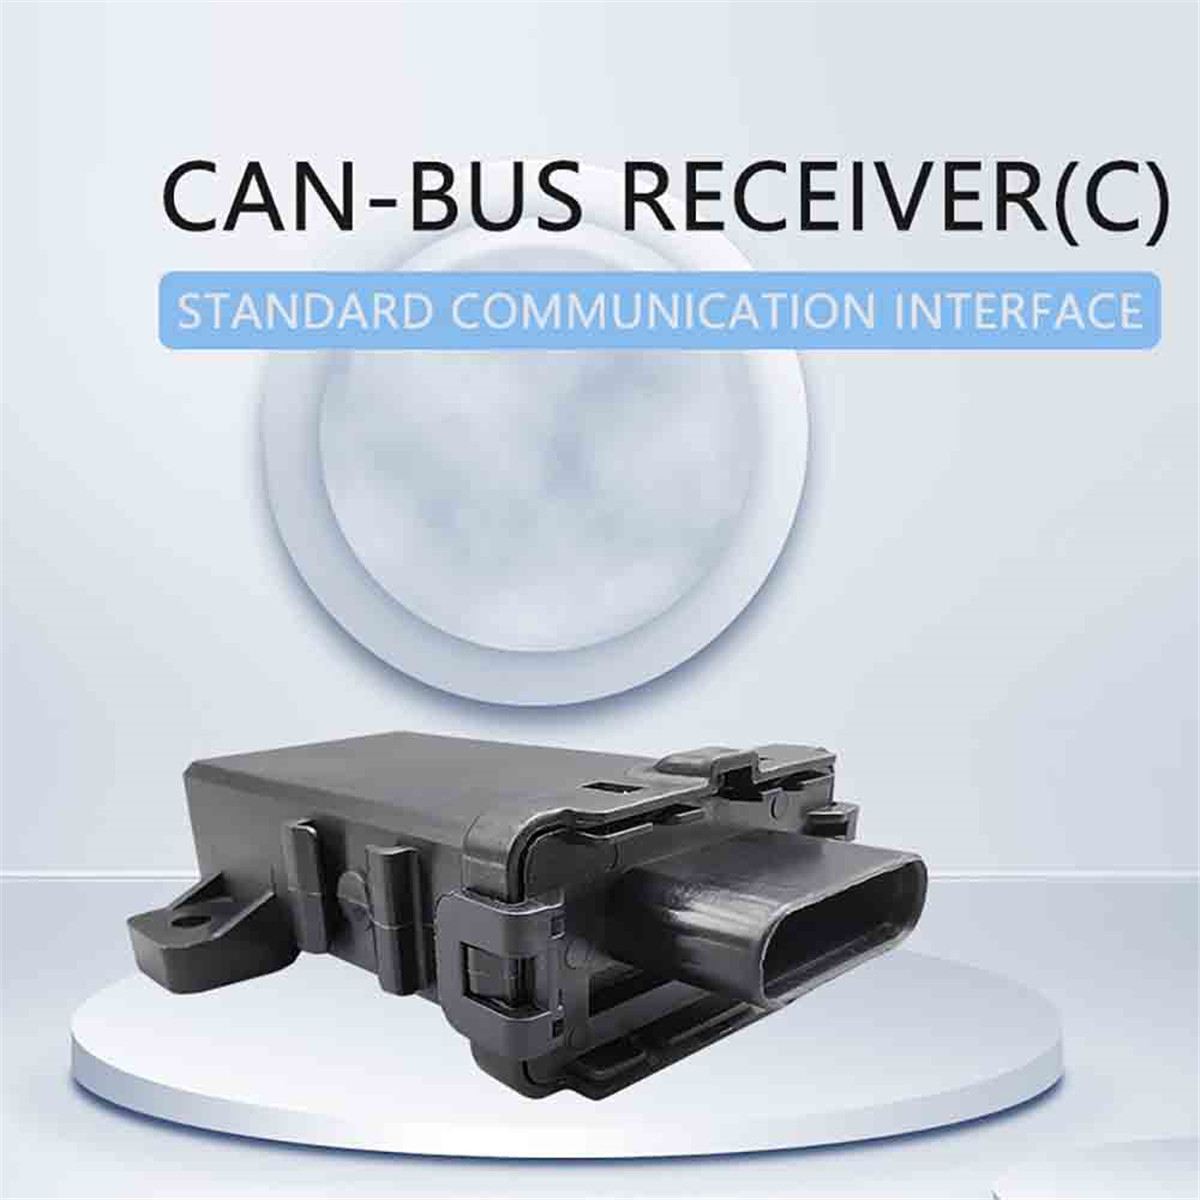 Ricevitore CAN-Bus01 (8)